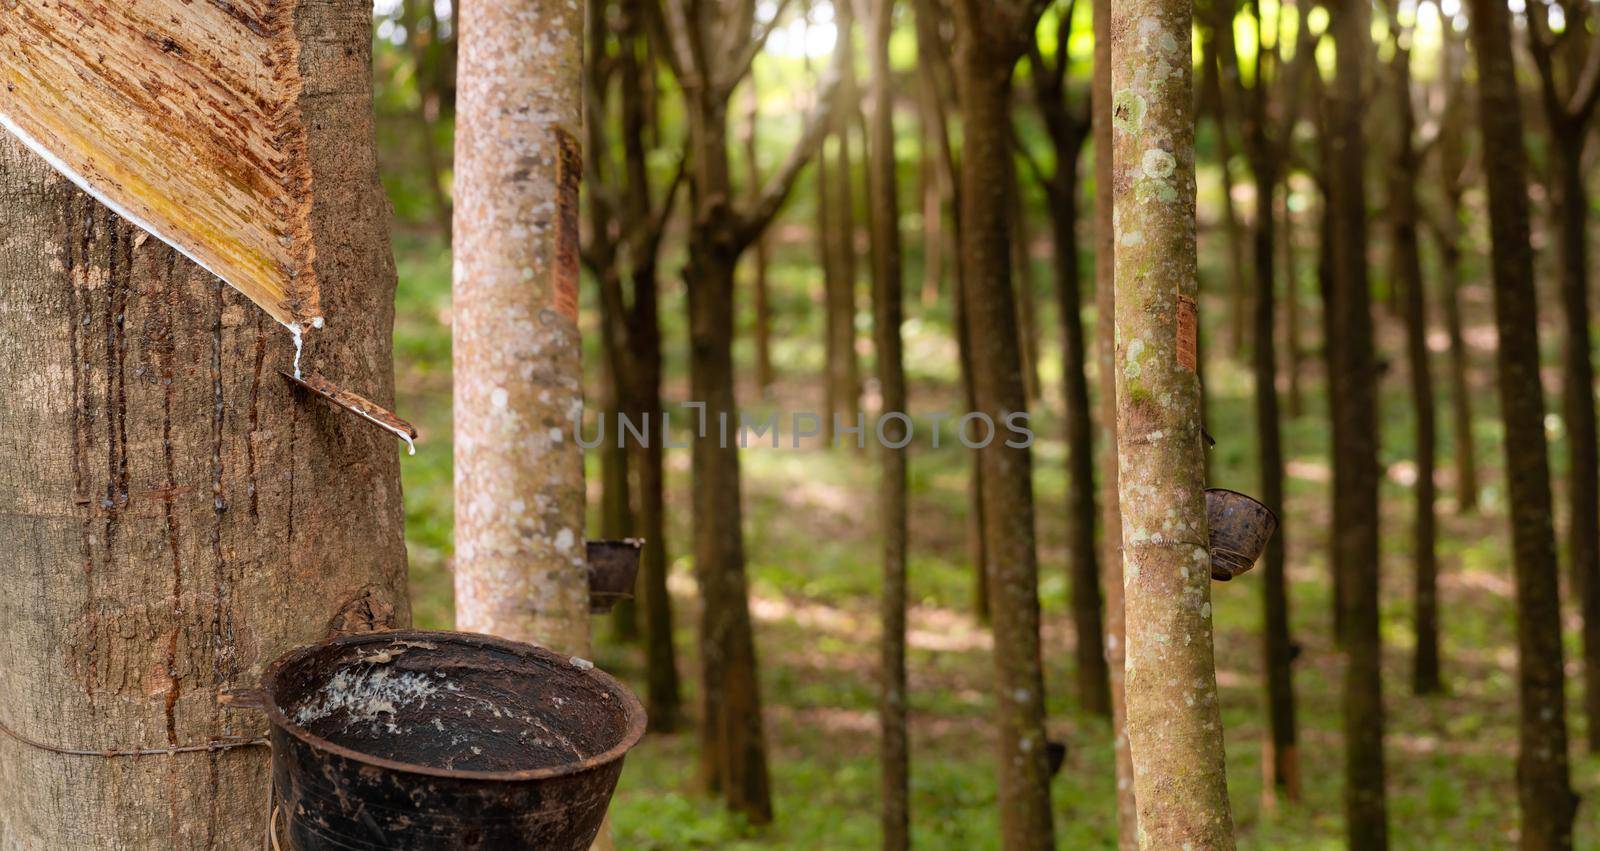 Rubber tapping in rubber tree garden. Natural latex extracted from para rubber plant. Rubber tree plantation. The milky liquid or latex oozes from wound of tree bark. Latex collect in small bucket.